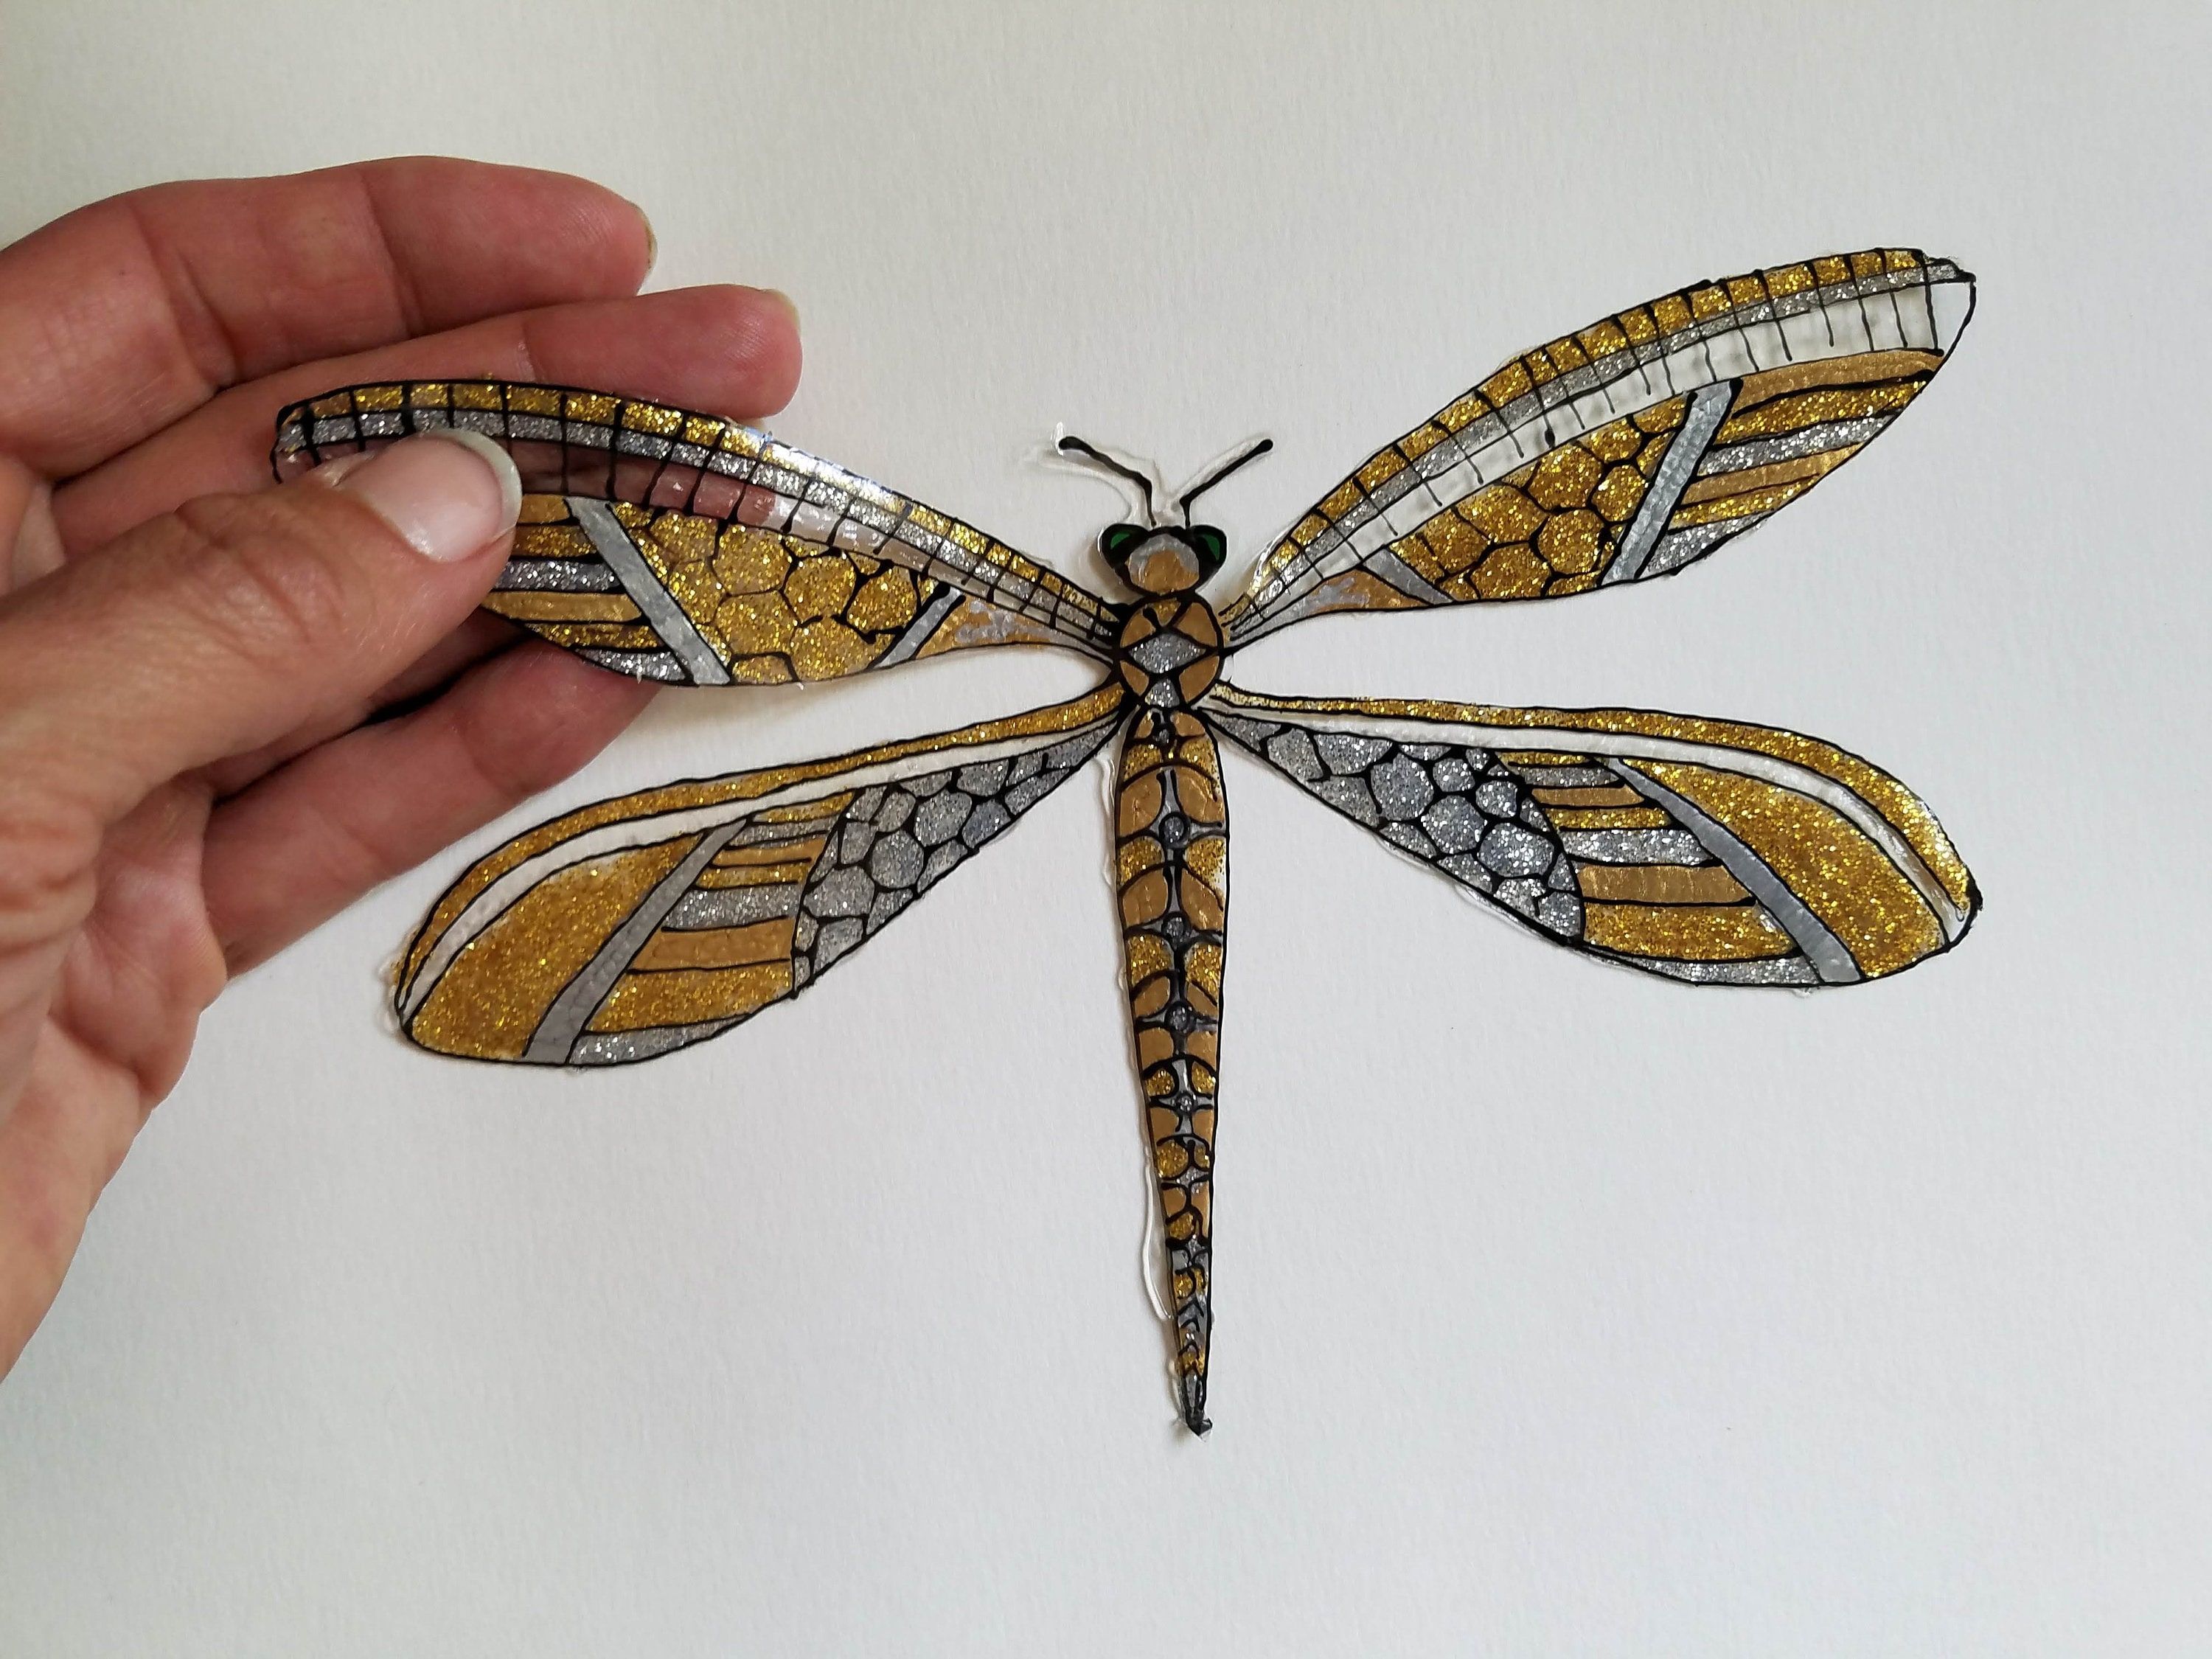 Blue and Gold Sparkle Dragonfly 8 inch wingspan handpainted art clingdecal